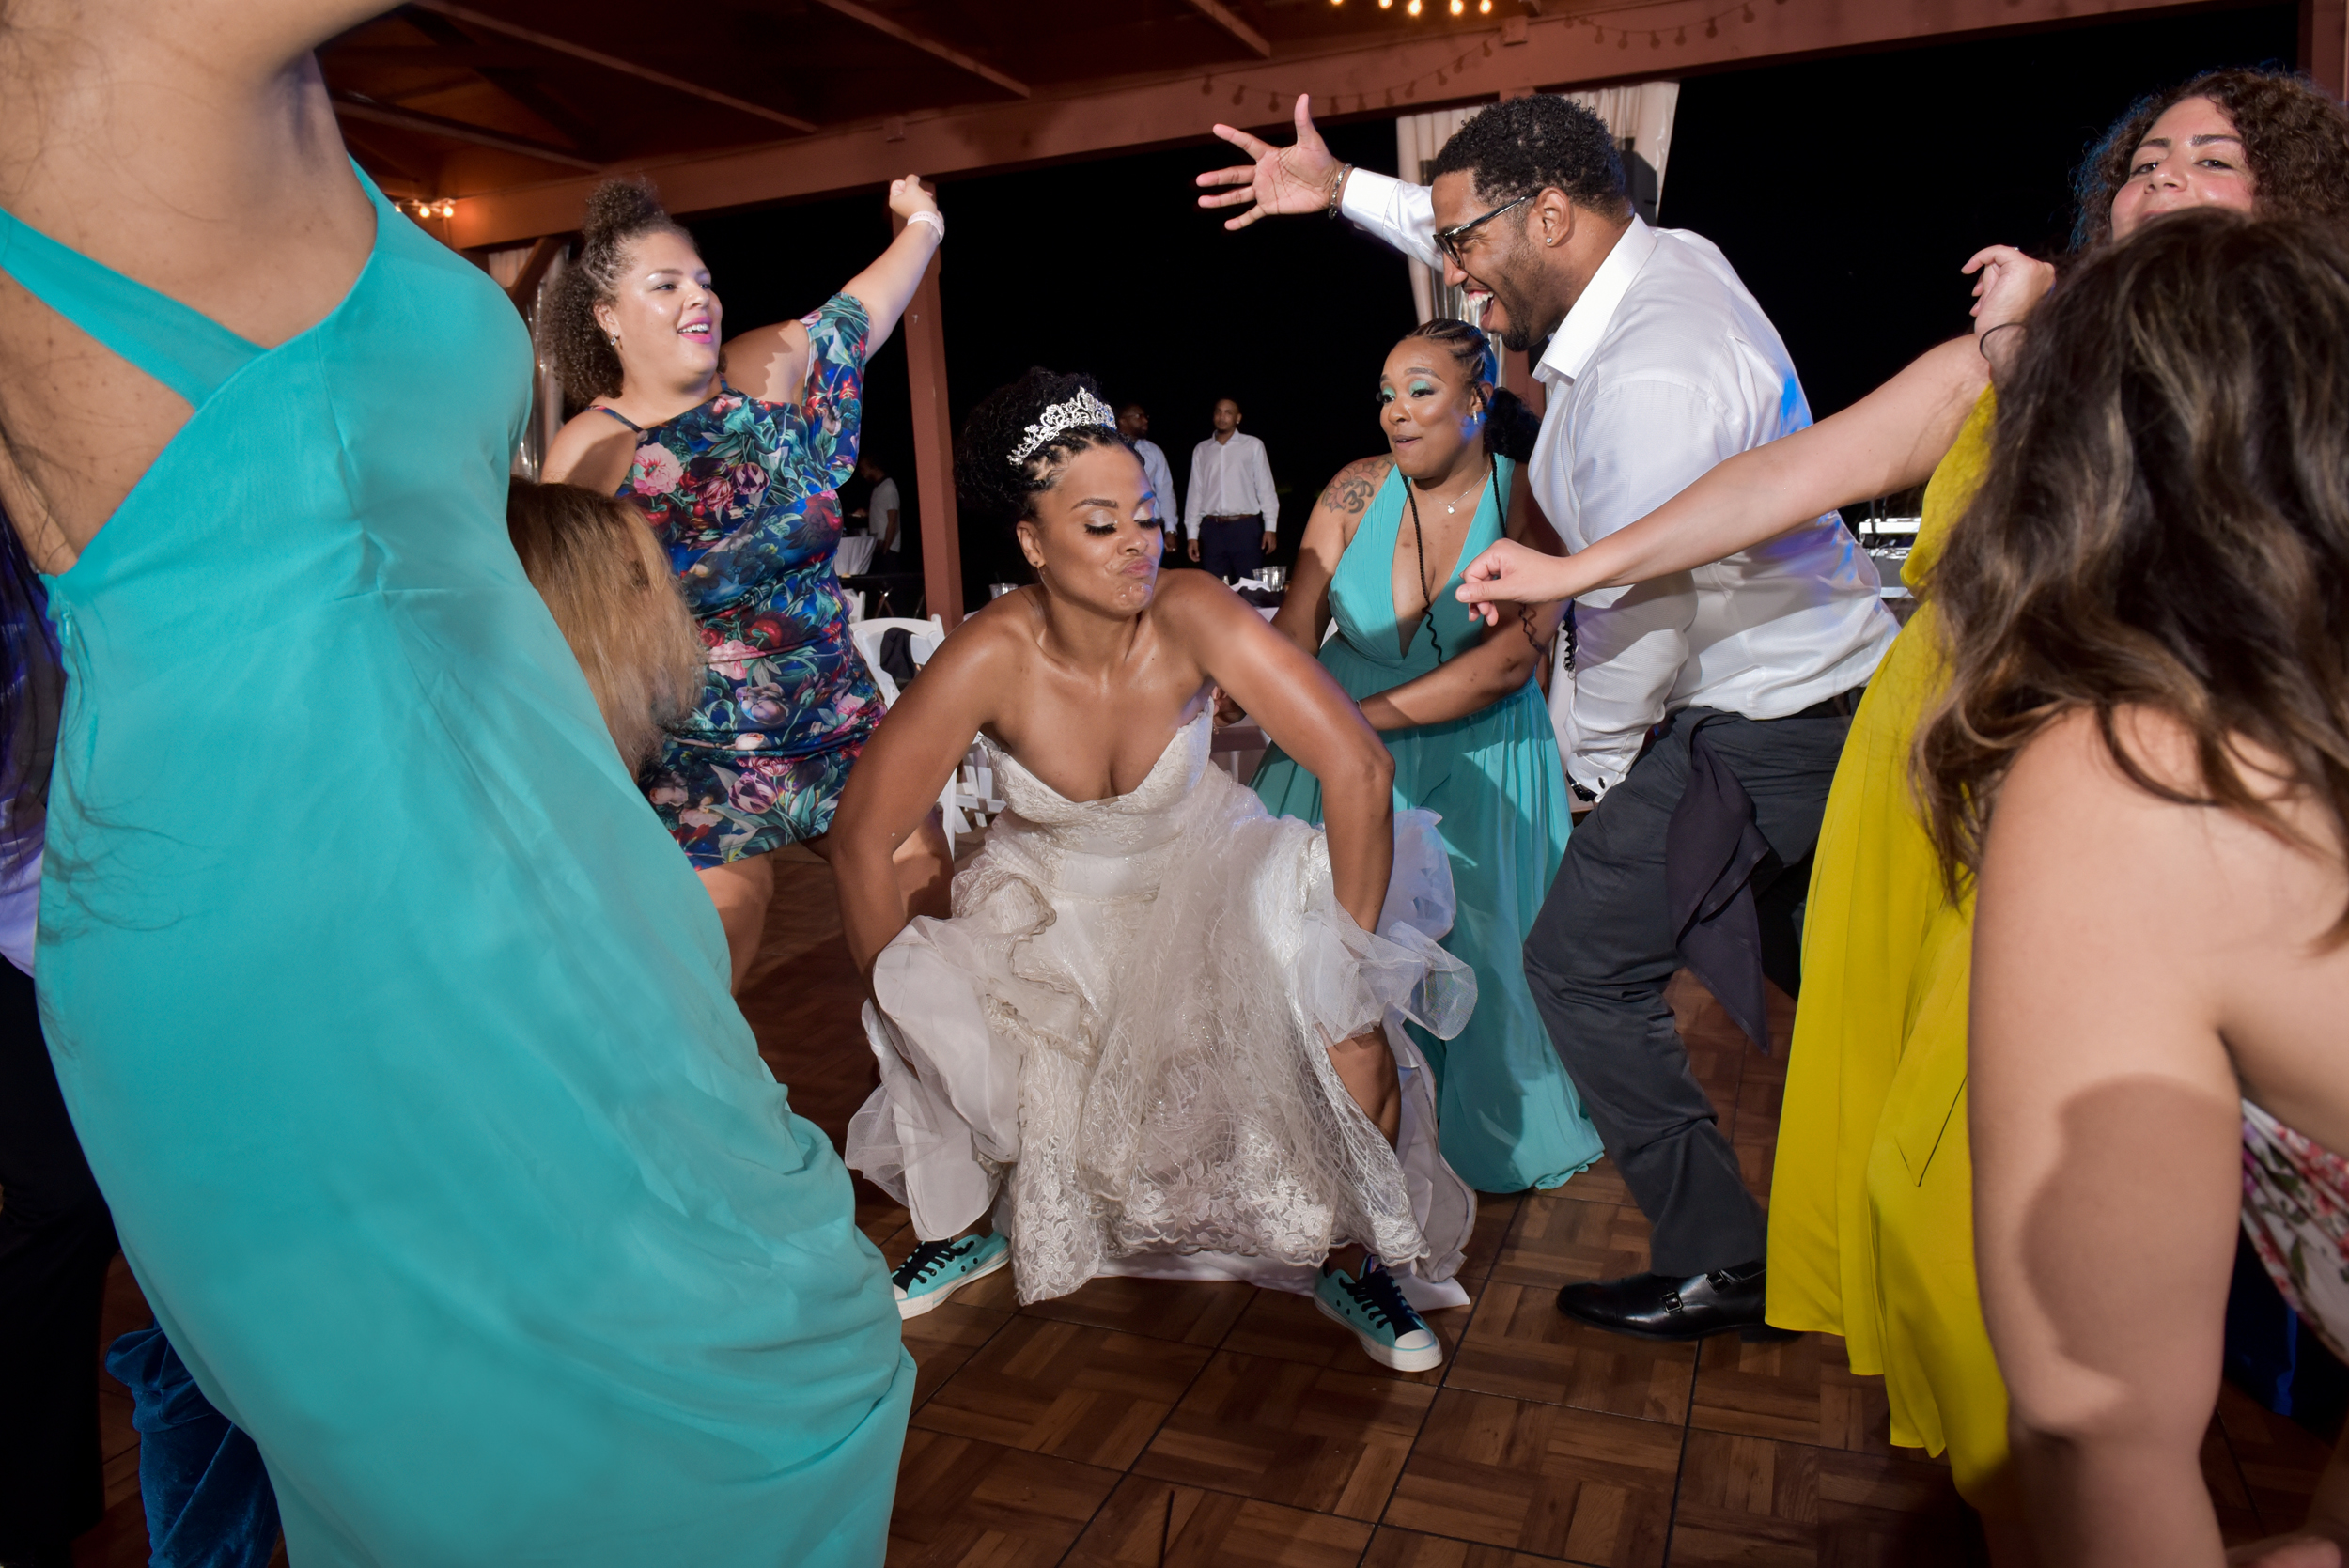 Bride joins the party on the dancefloor.